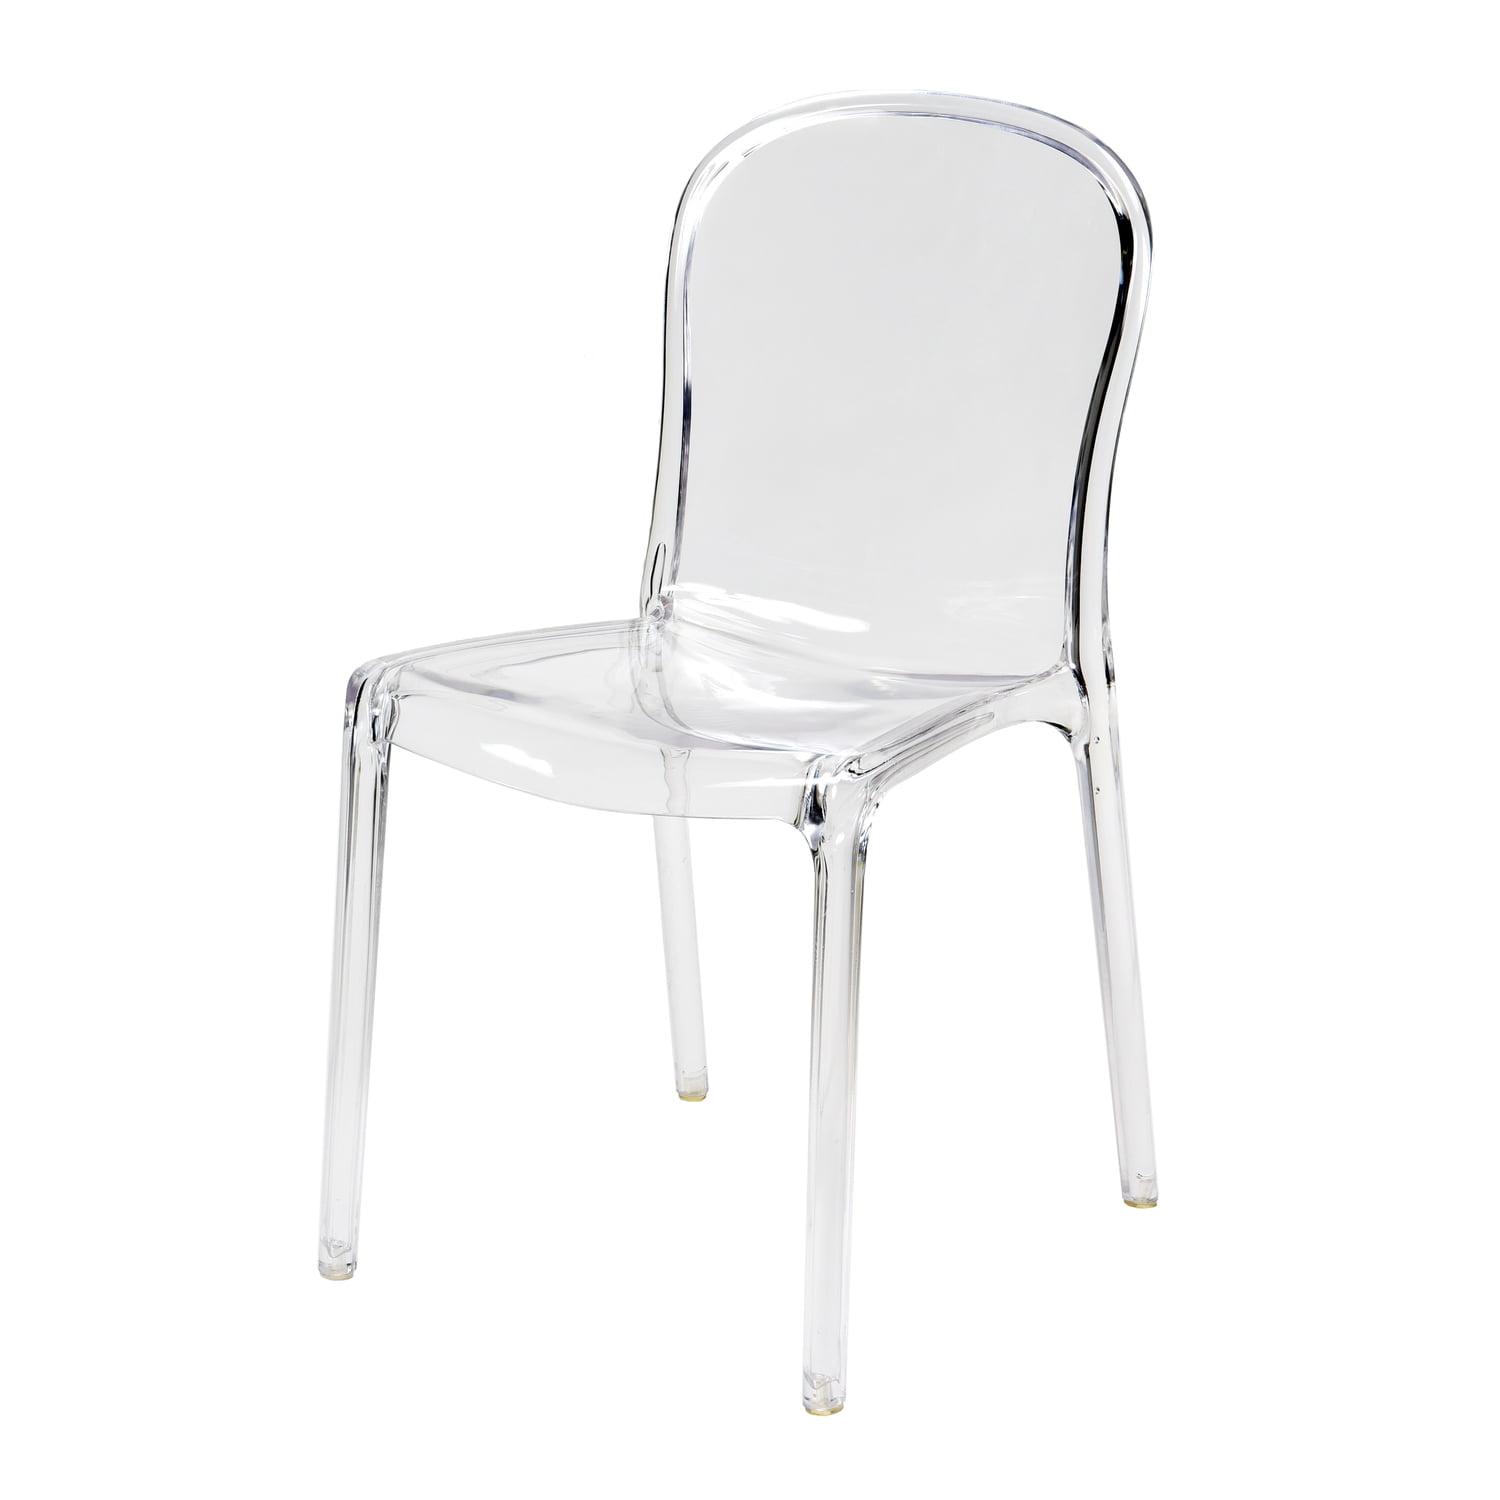 Rpc-genoa-cl-4 Genoa Polycarbonate Dining Chair, Clear - 33 In. - Set Of 4